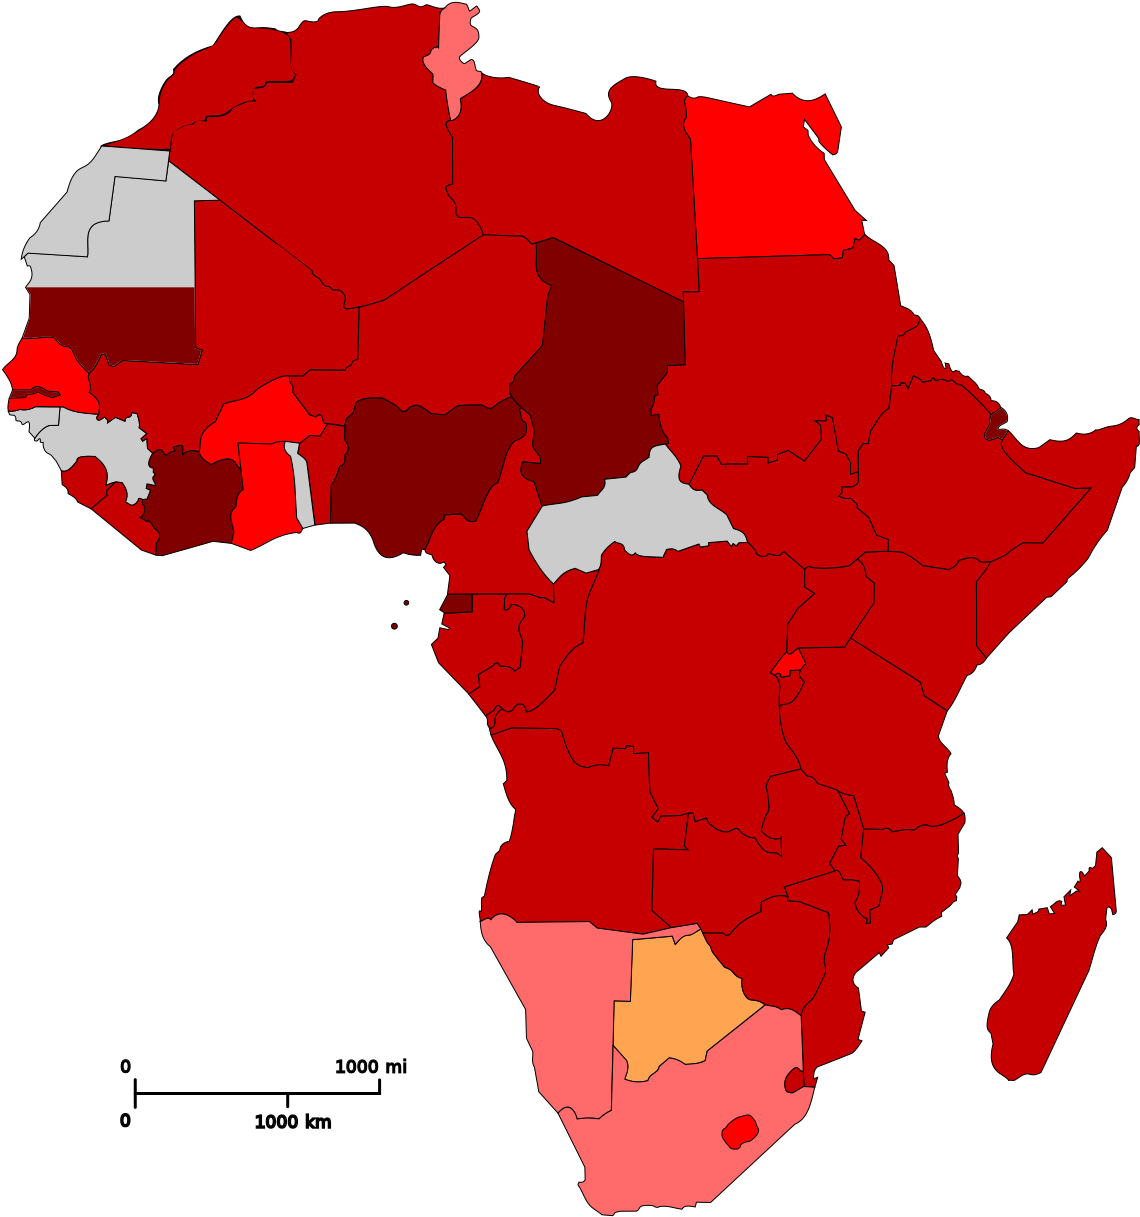 African Union Member States By Corruption Index - Africa Map (1200x1230)